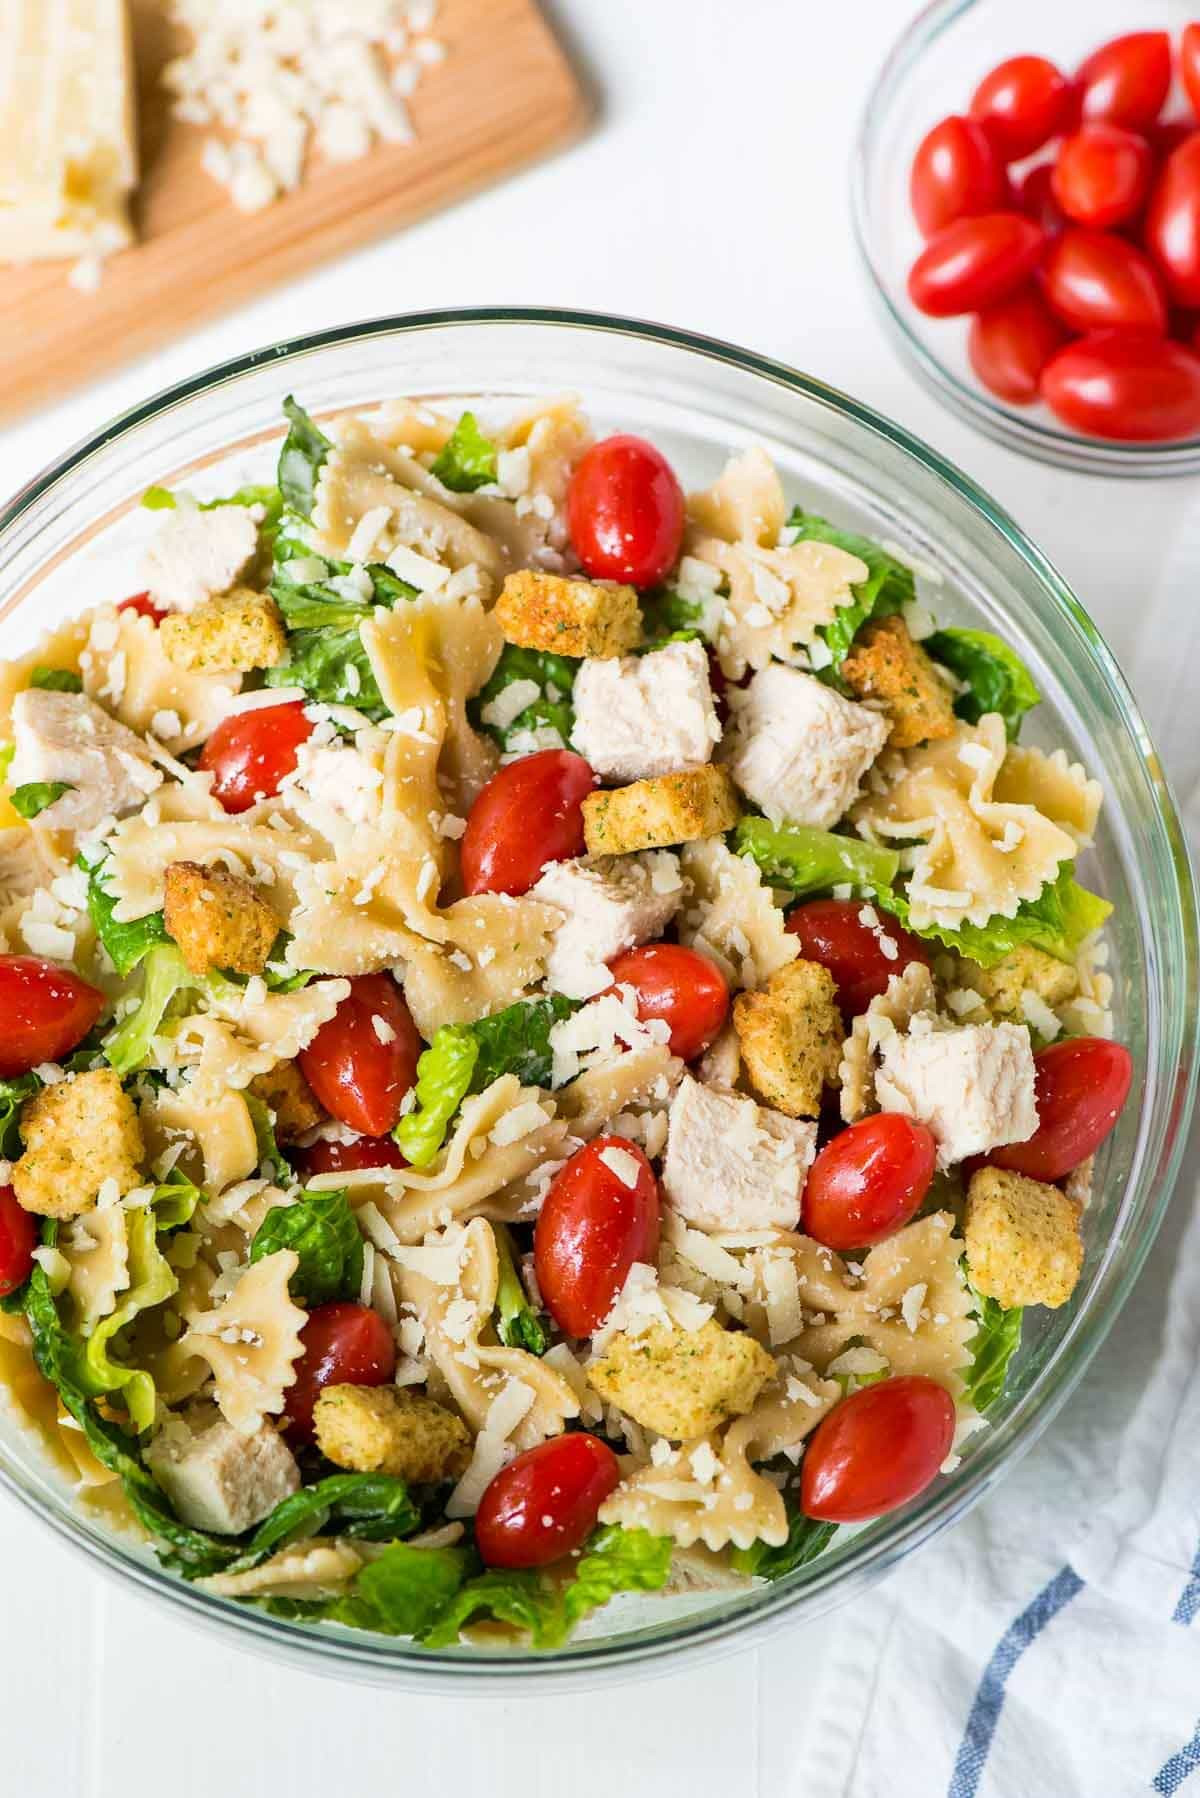 Healthy Pasta Salad With Chicken
 Asian Noodle Salad with Creamy Peanut Dressing